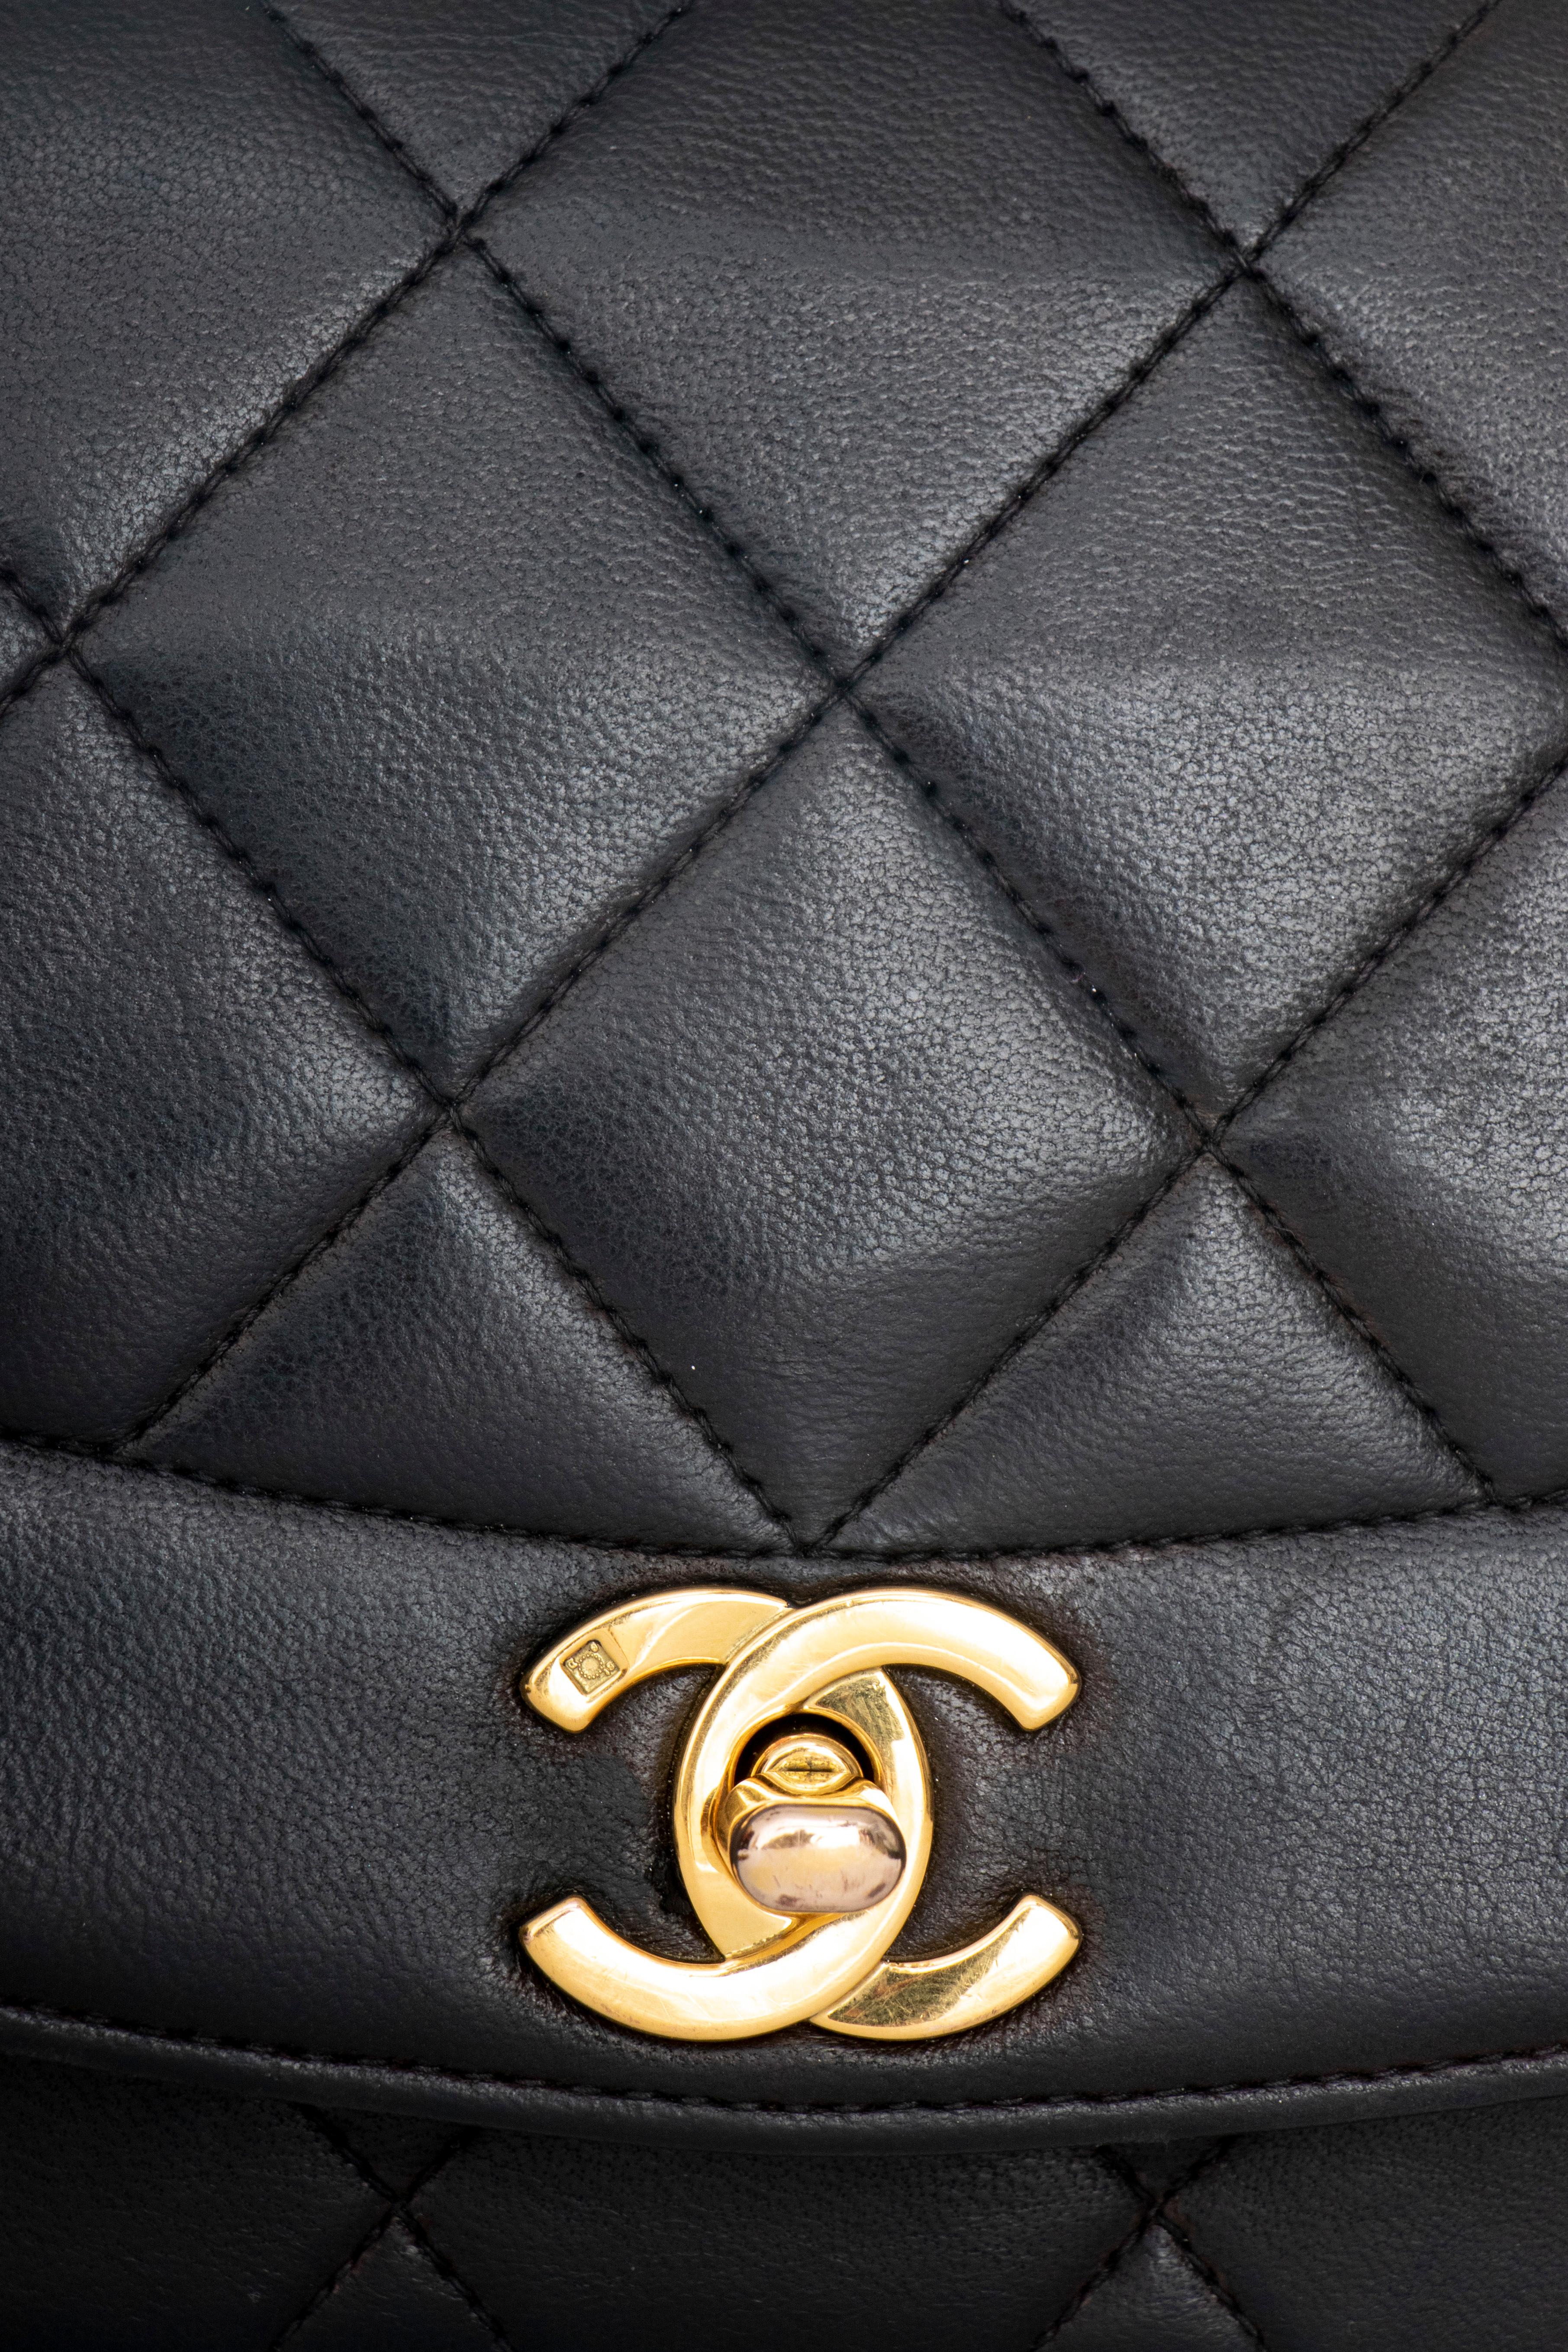 A 1990s Chanel black quilted lambskin shoulder bag with gold hardware.  
The bag has the following measurements:
Length: 22 cm
Depth: 7 cm
Hight: 13.5 cm